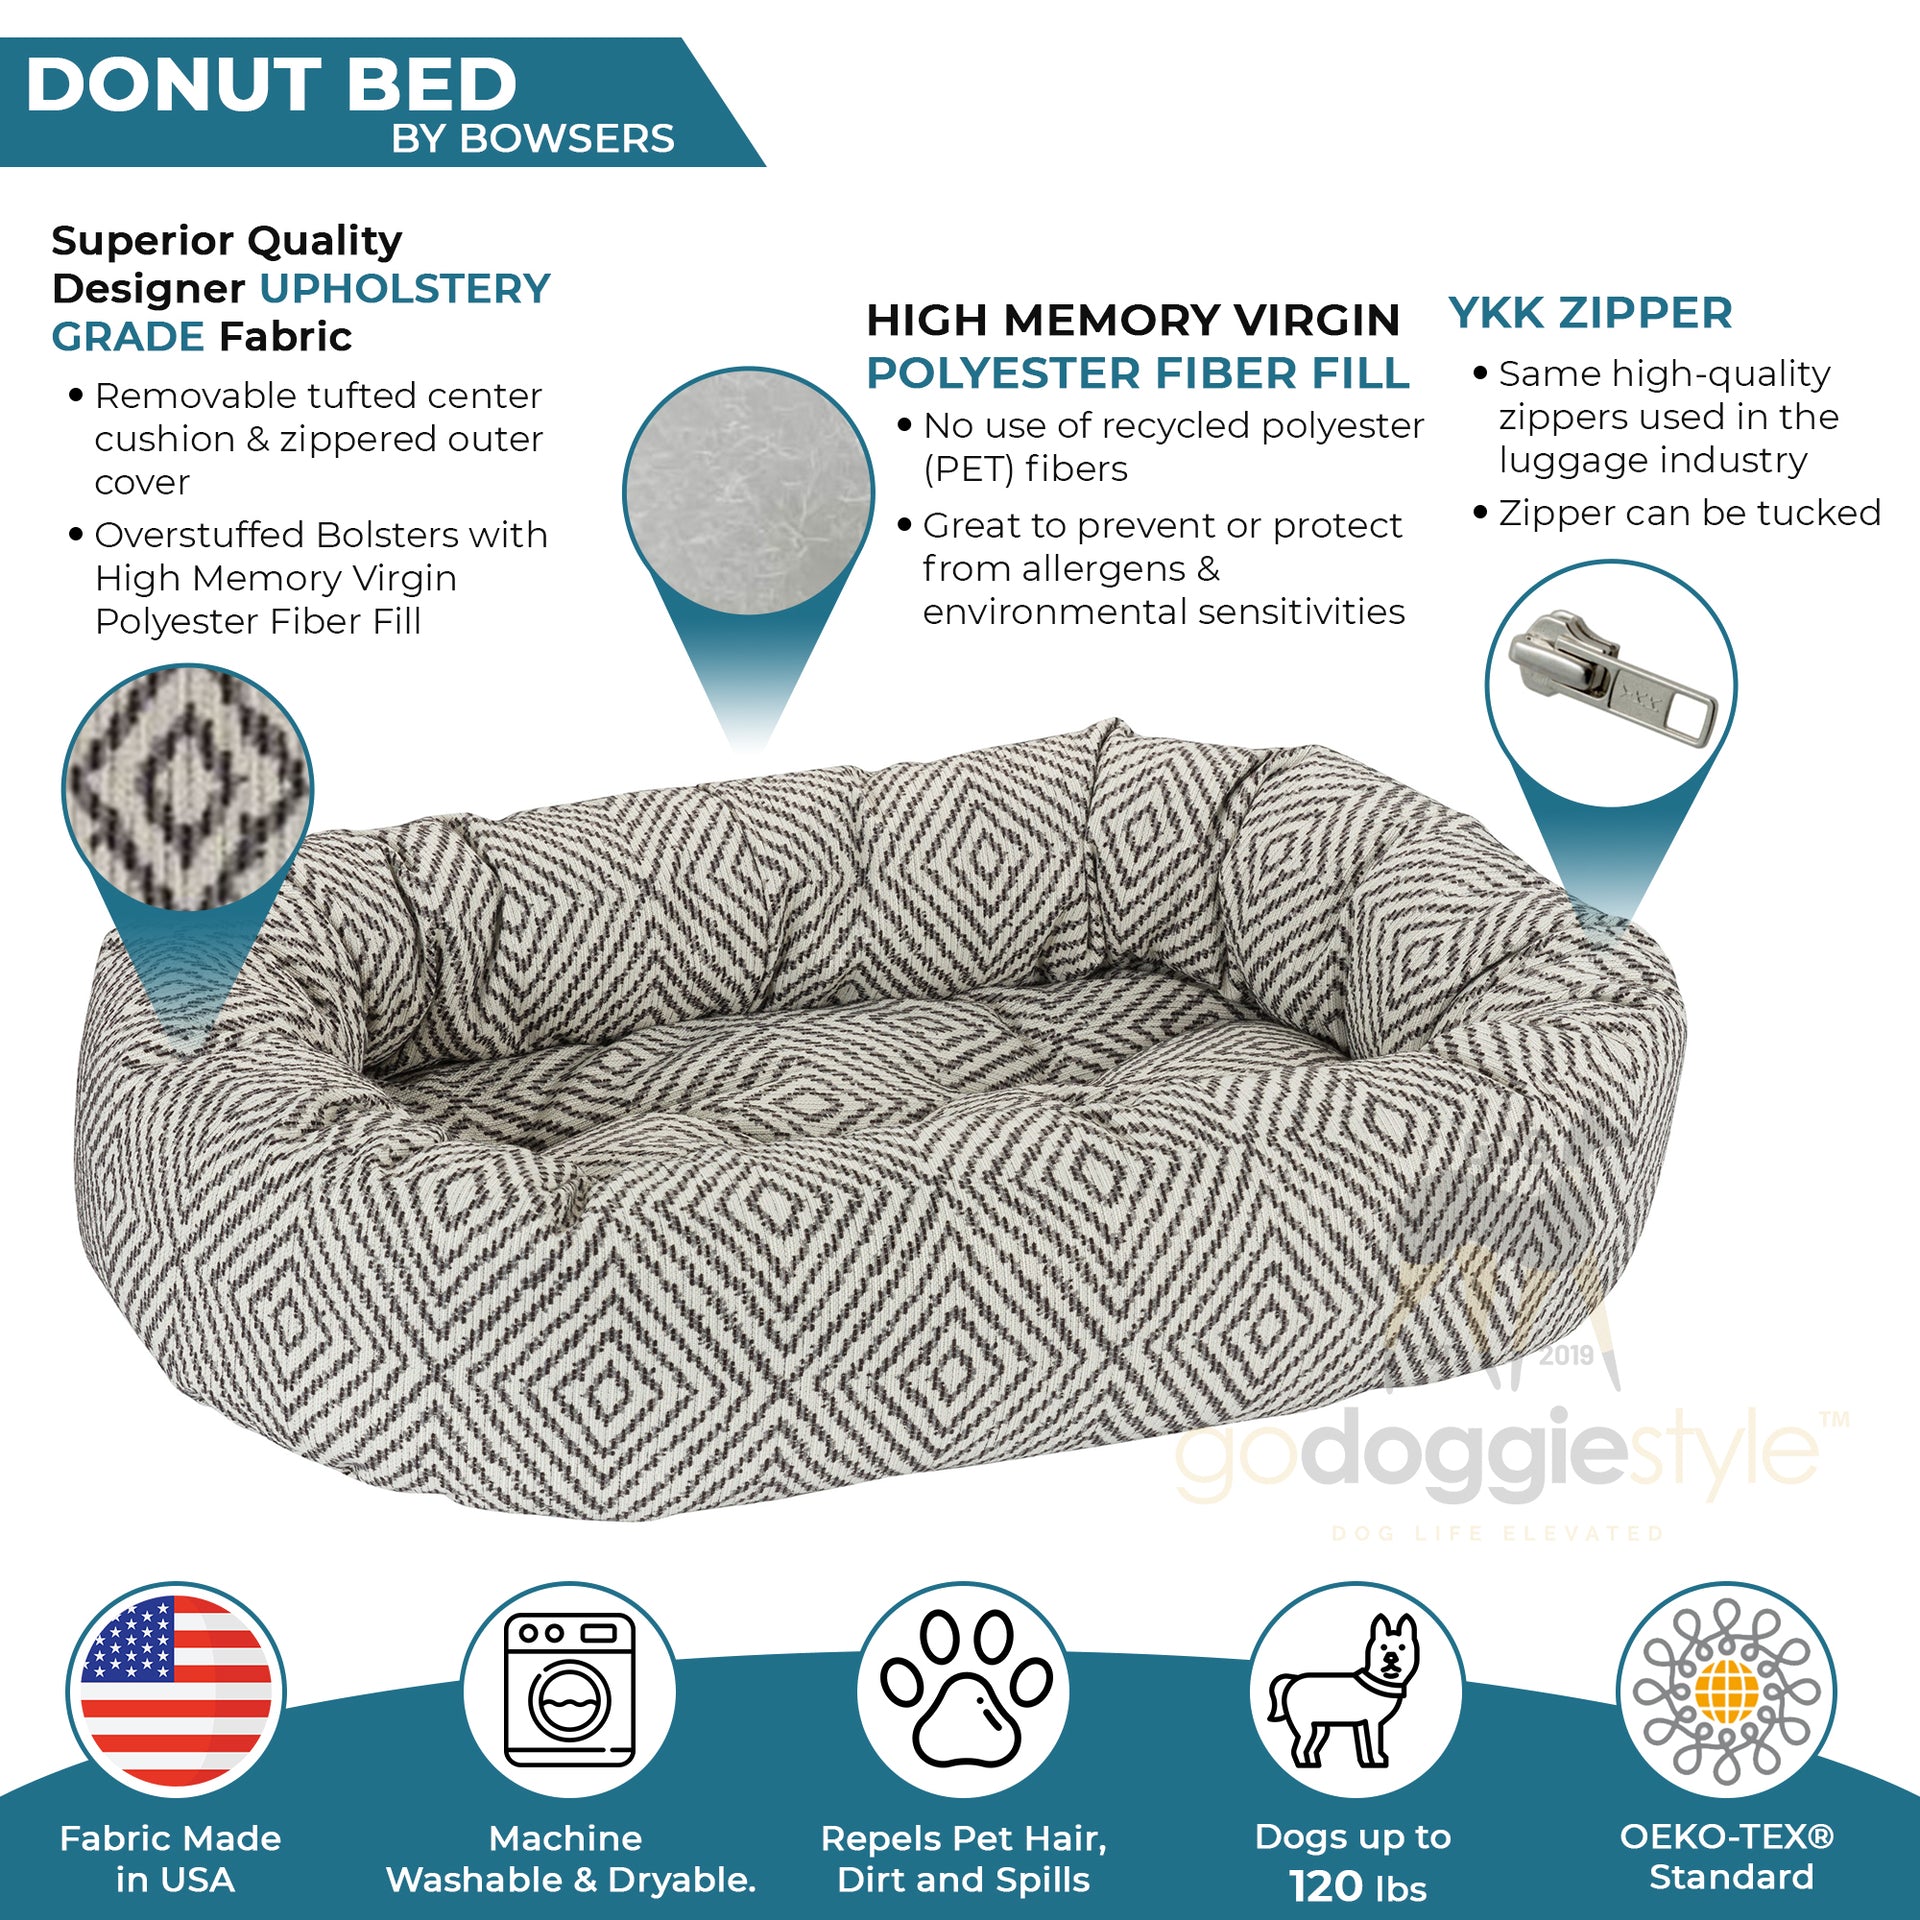 Dog Donut Bed Info Graphic